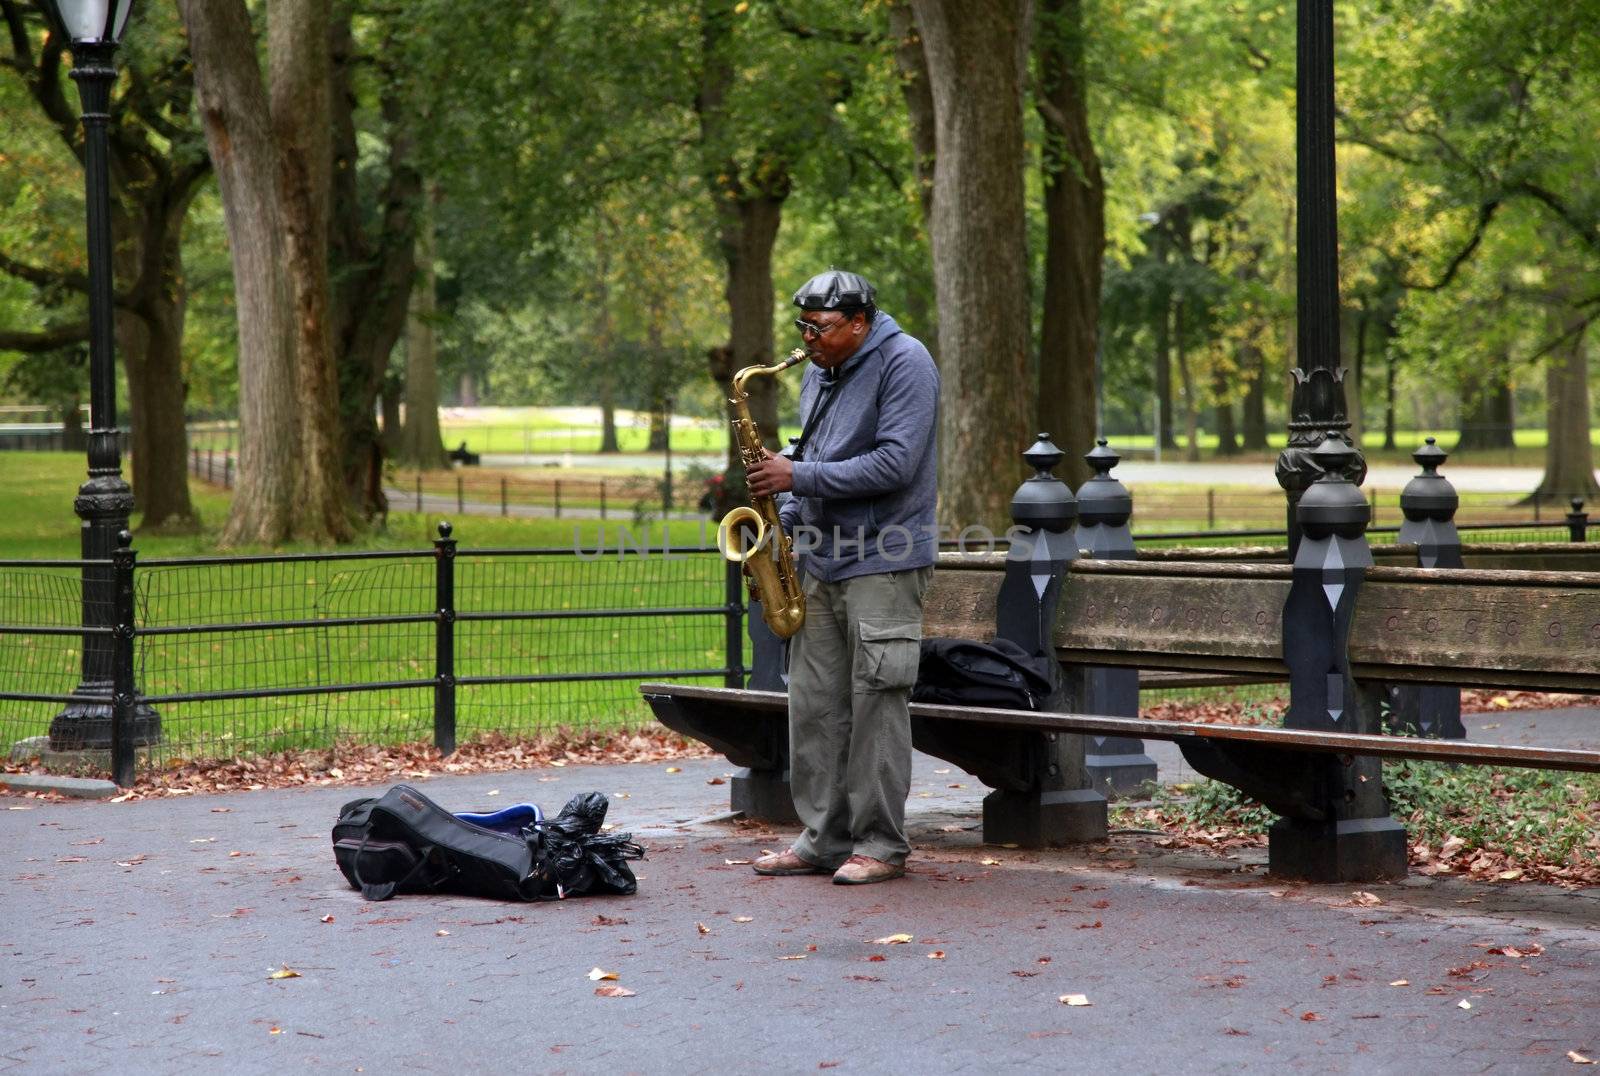 NEW YORK CITY - OCTOBER 9: A saxaphonist busking in Central Park's Bethesda Terrace, a popular tourist attraction October 9, 2012 in New York, NY.